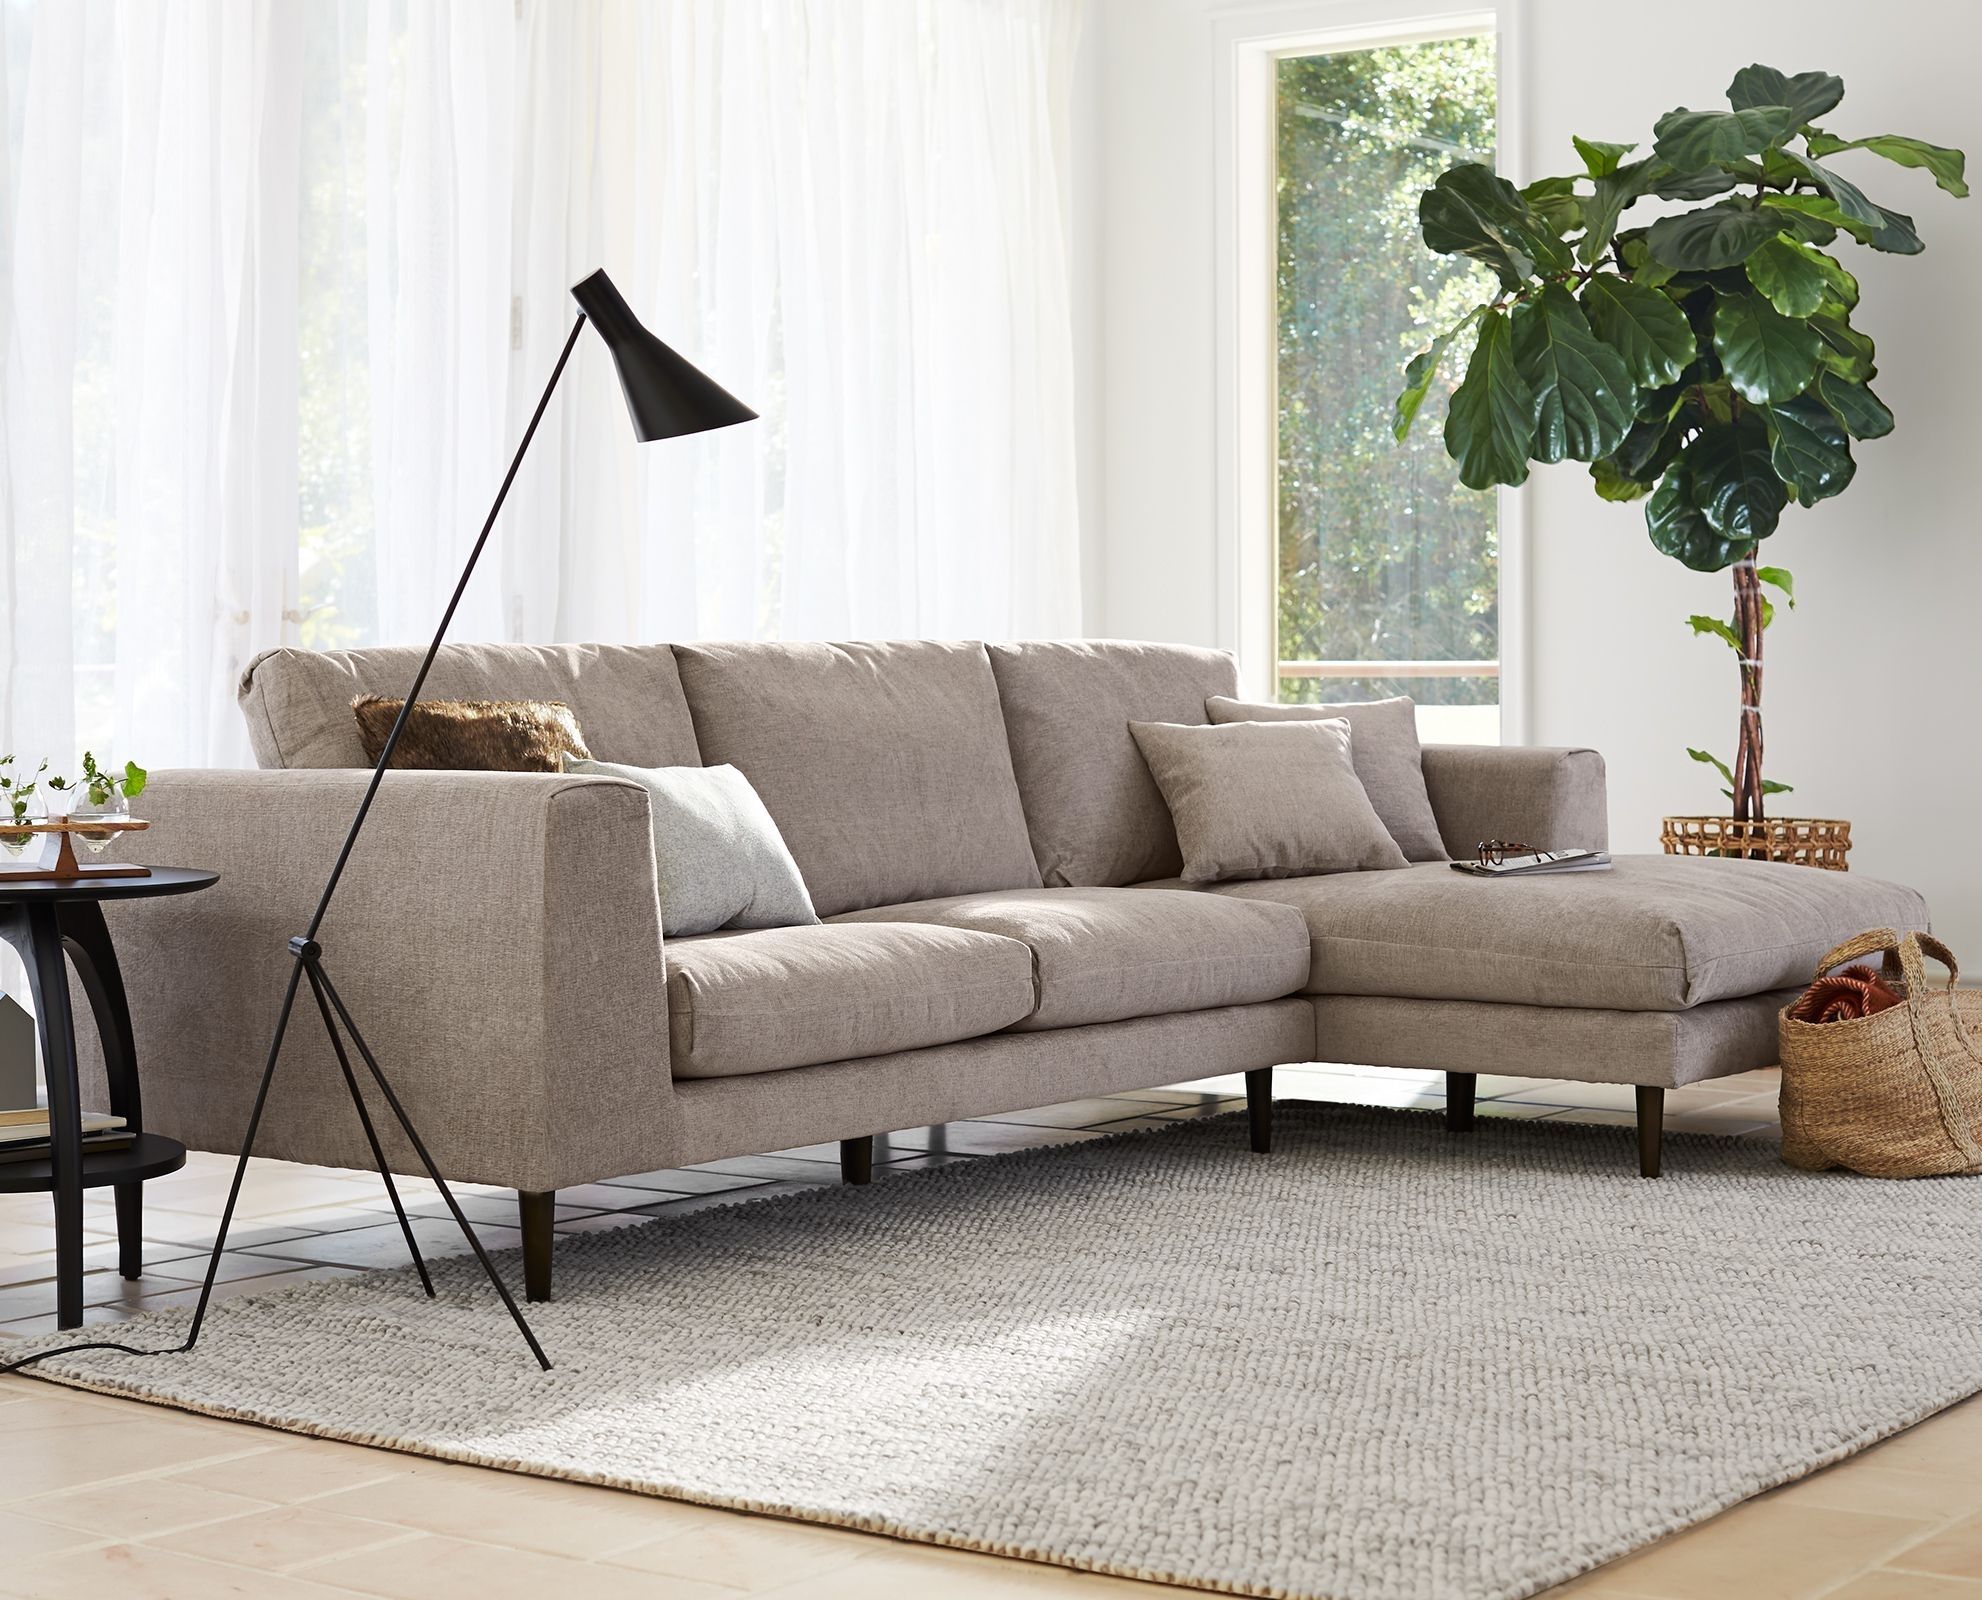 Featured Photo of 10 Photos Dania Sectional Sofas